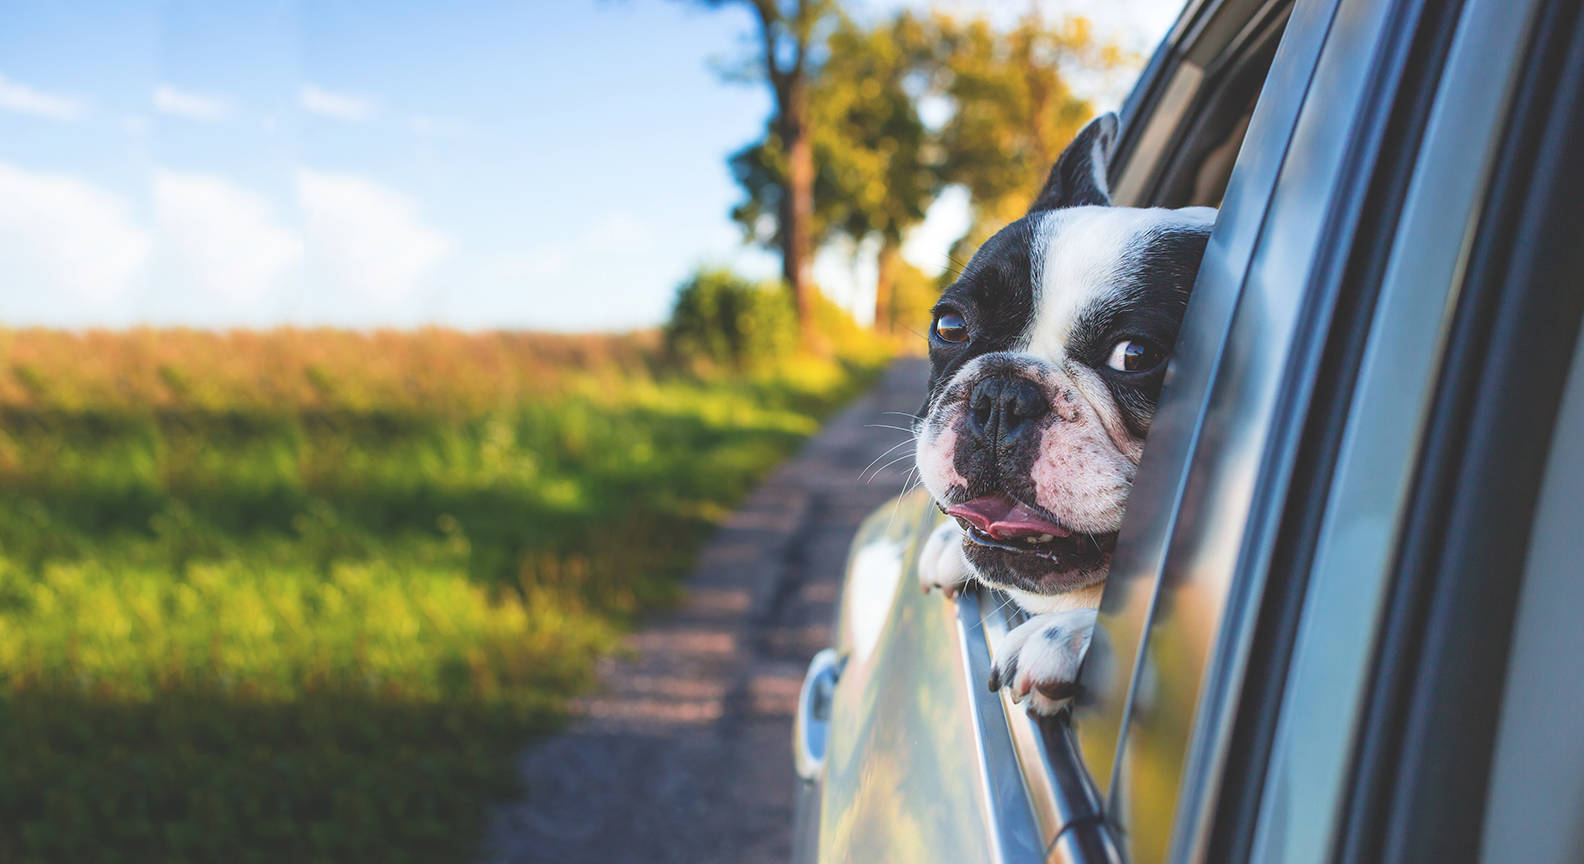 Make sure your pet has plenty of air when riding in the car. And do not leave pets in the car in the heat, even with the windows cracked a space.